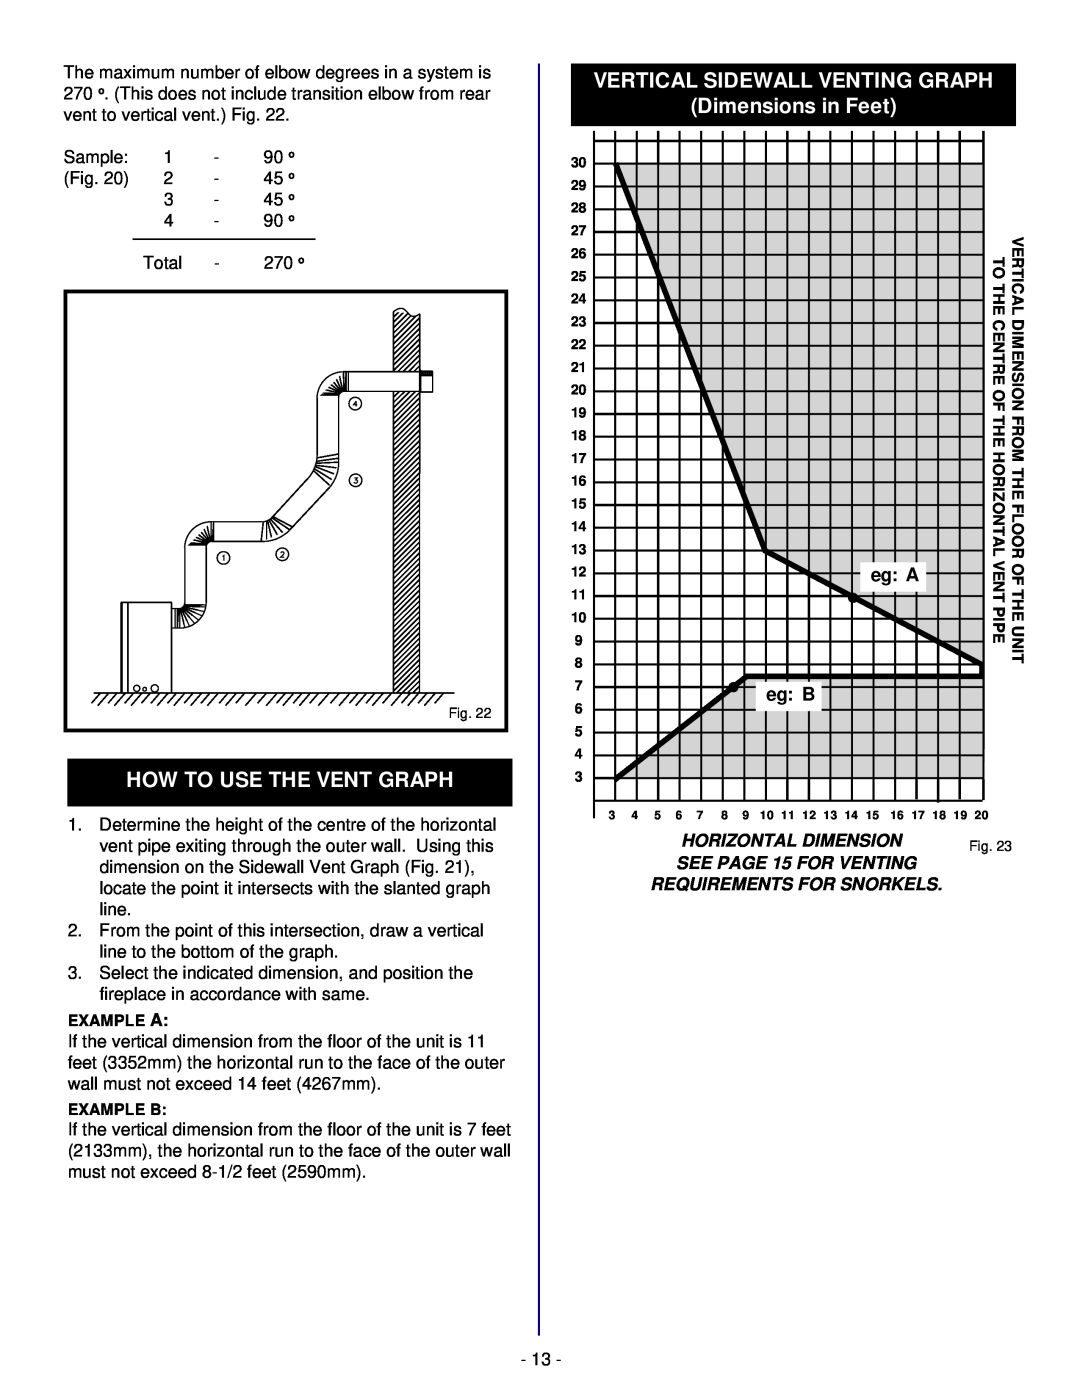 Vermont Casting DBR33, DBR39 How To Use The Vent Graph, Vertical Sidewall Venting Graph, Dimensions in Feet, eg A, eg B 